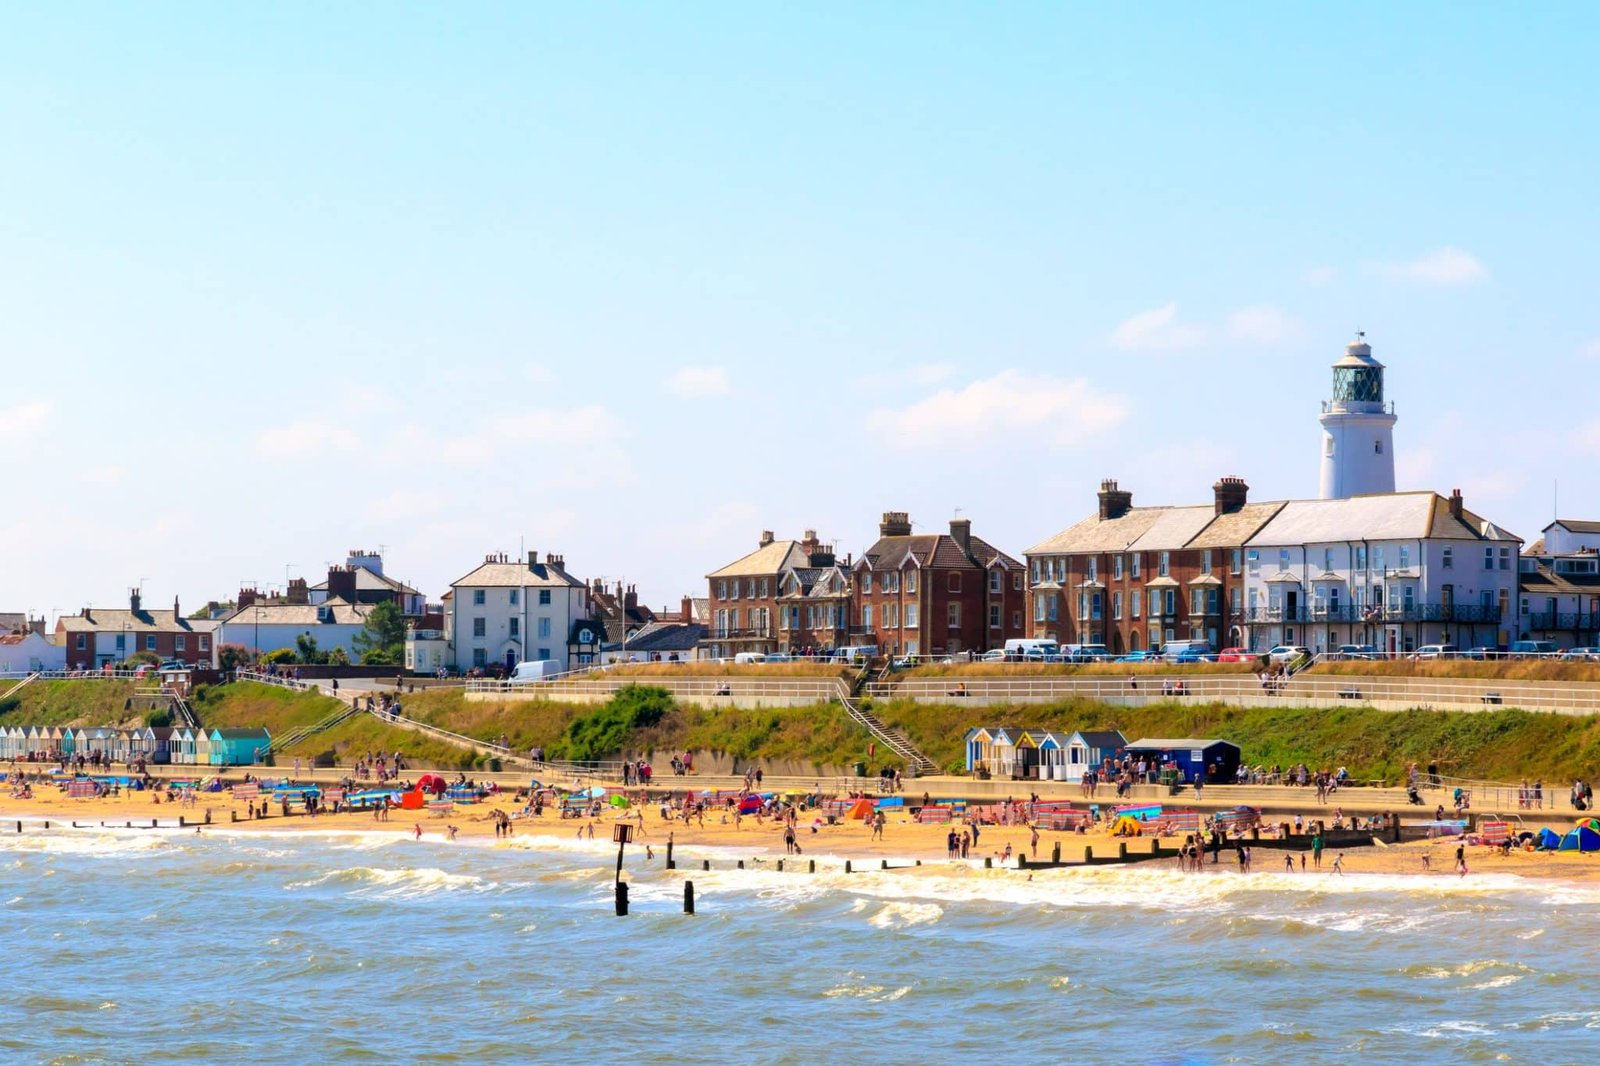 Seaside cottages and lighthouse at Southwold beach, UK